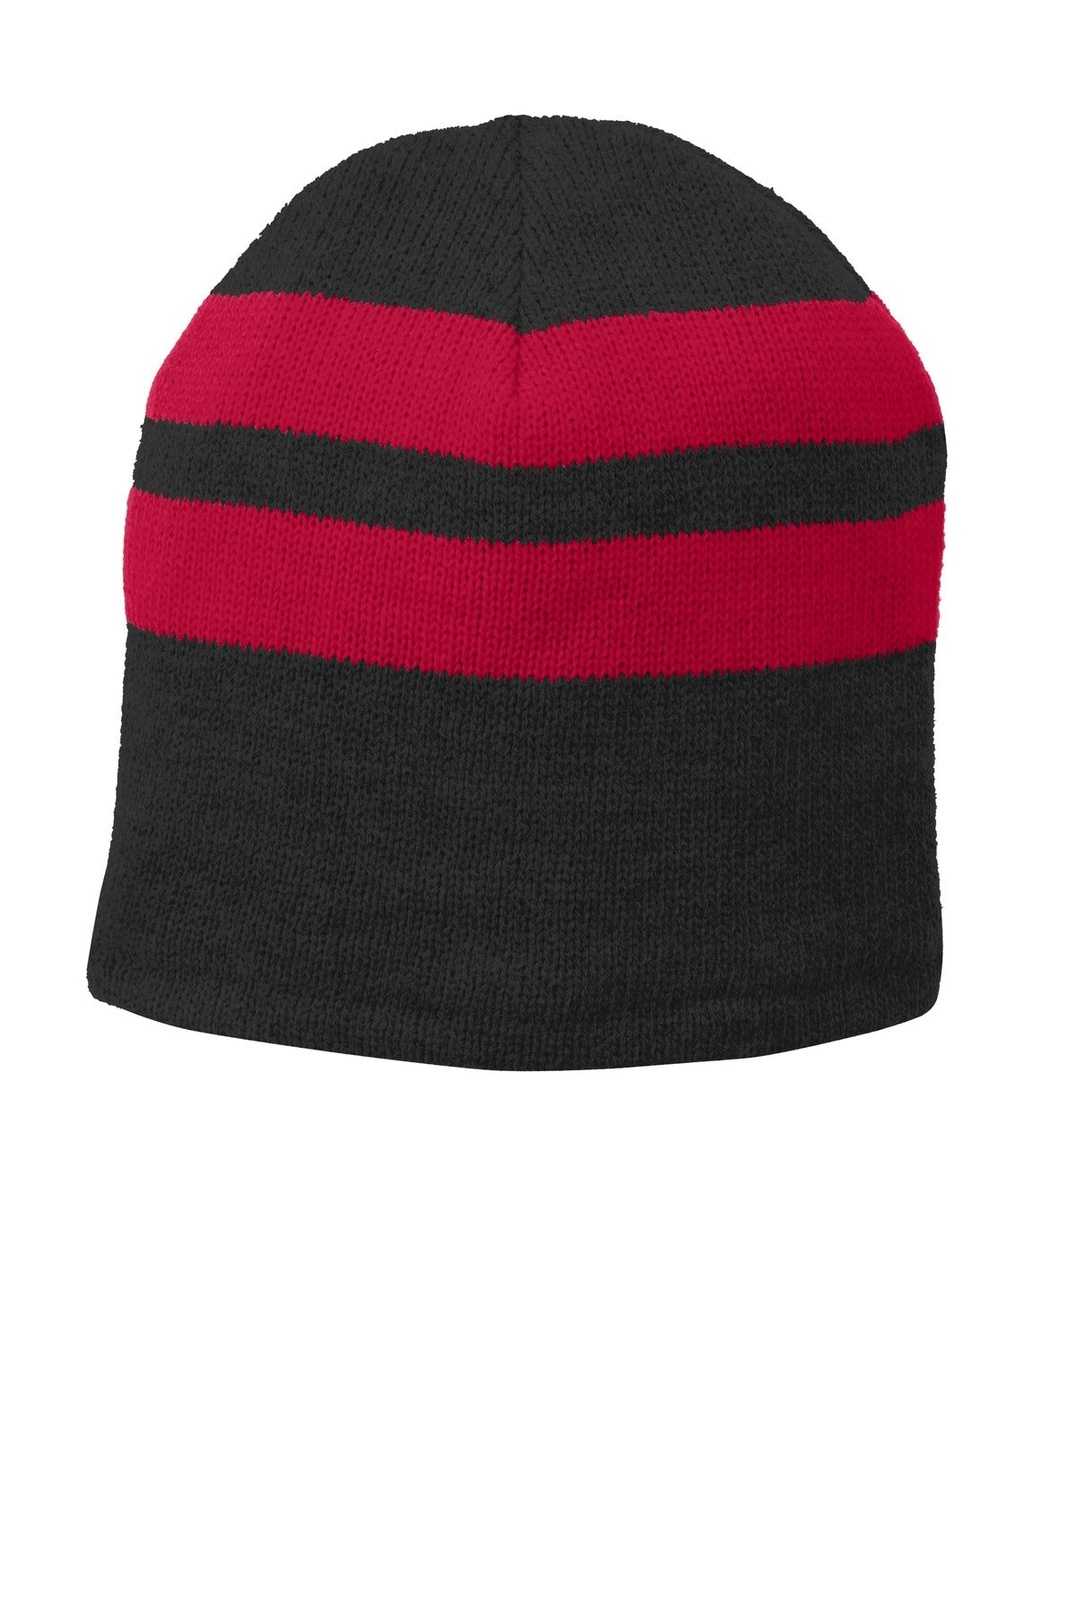 Port & Company C922 Fleece-Lined Striped Beanie Cap - Black Athletic Red - HIT a Double - 1